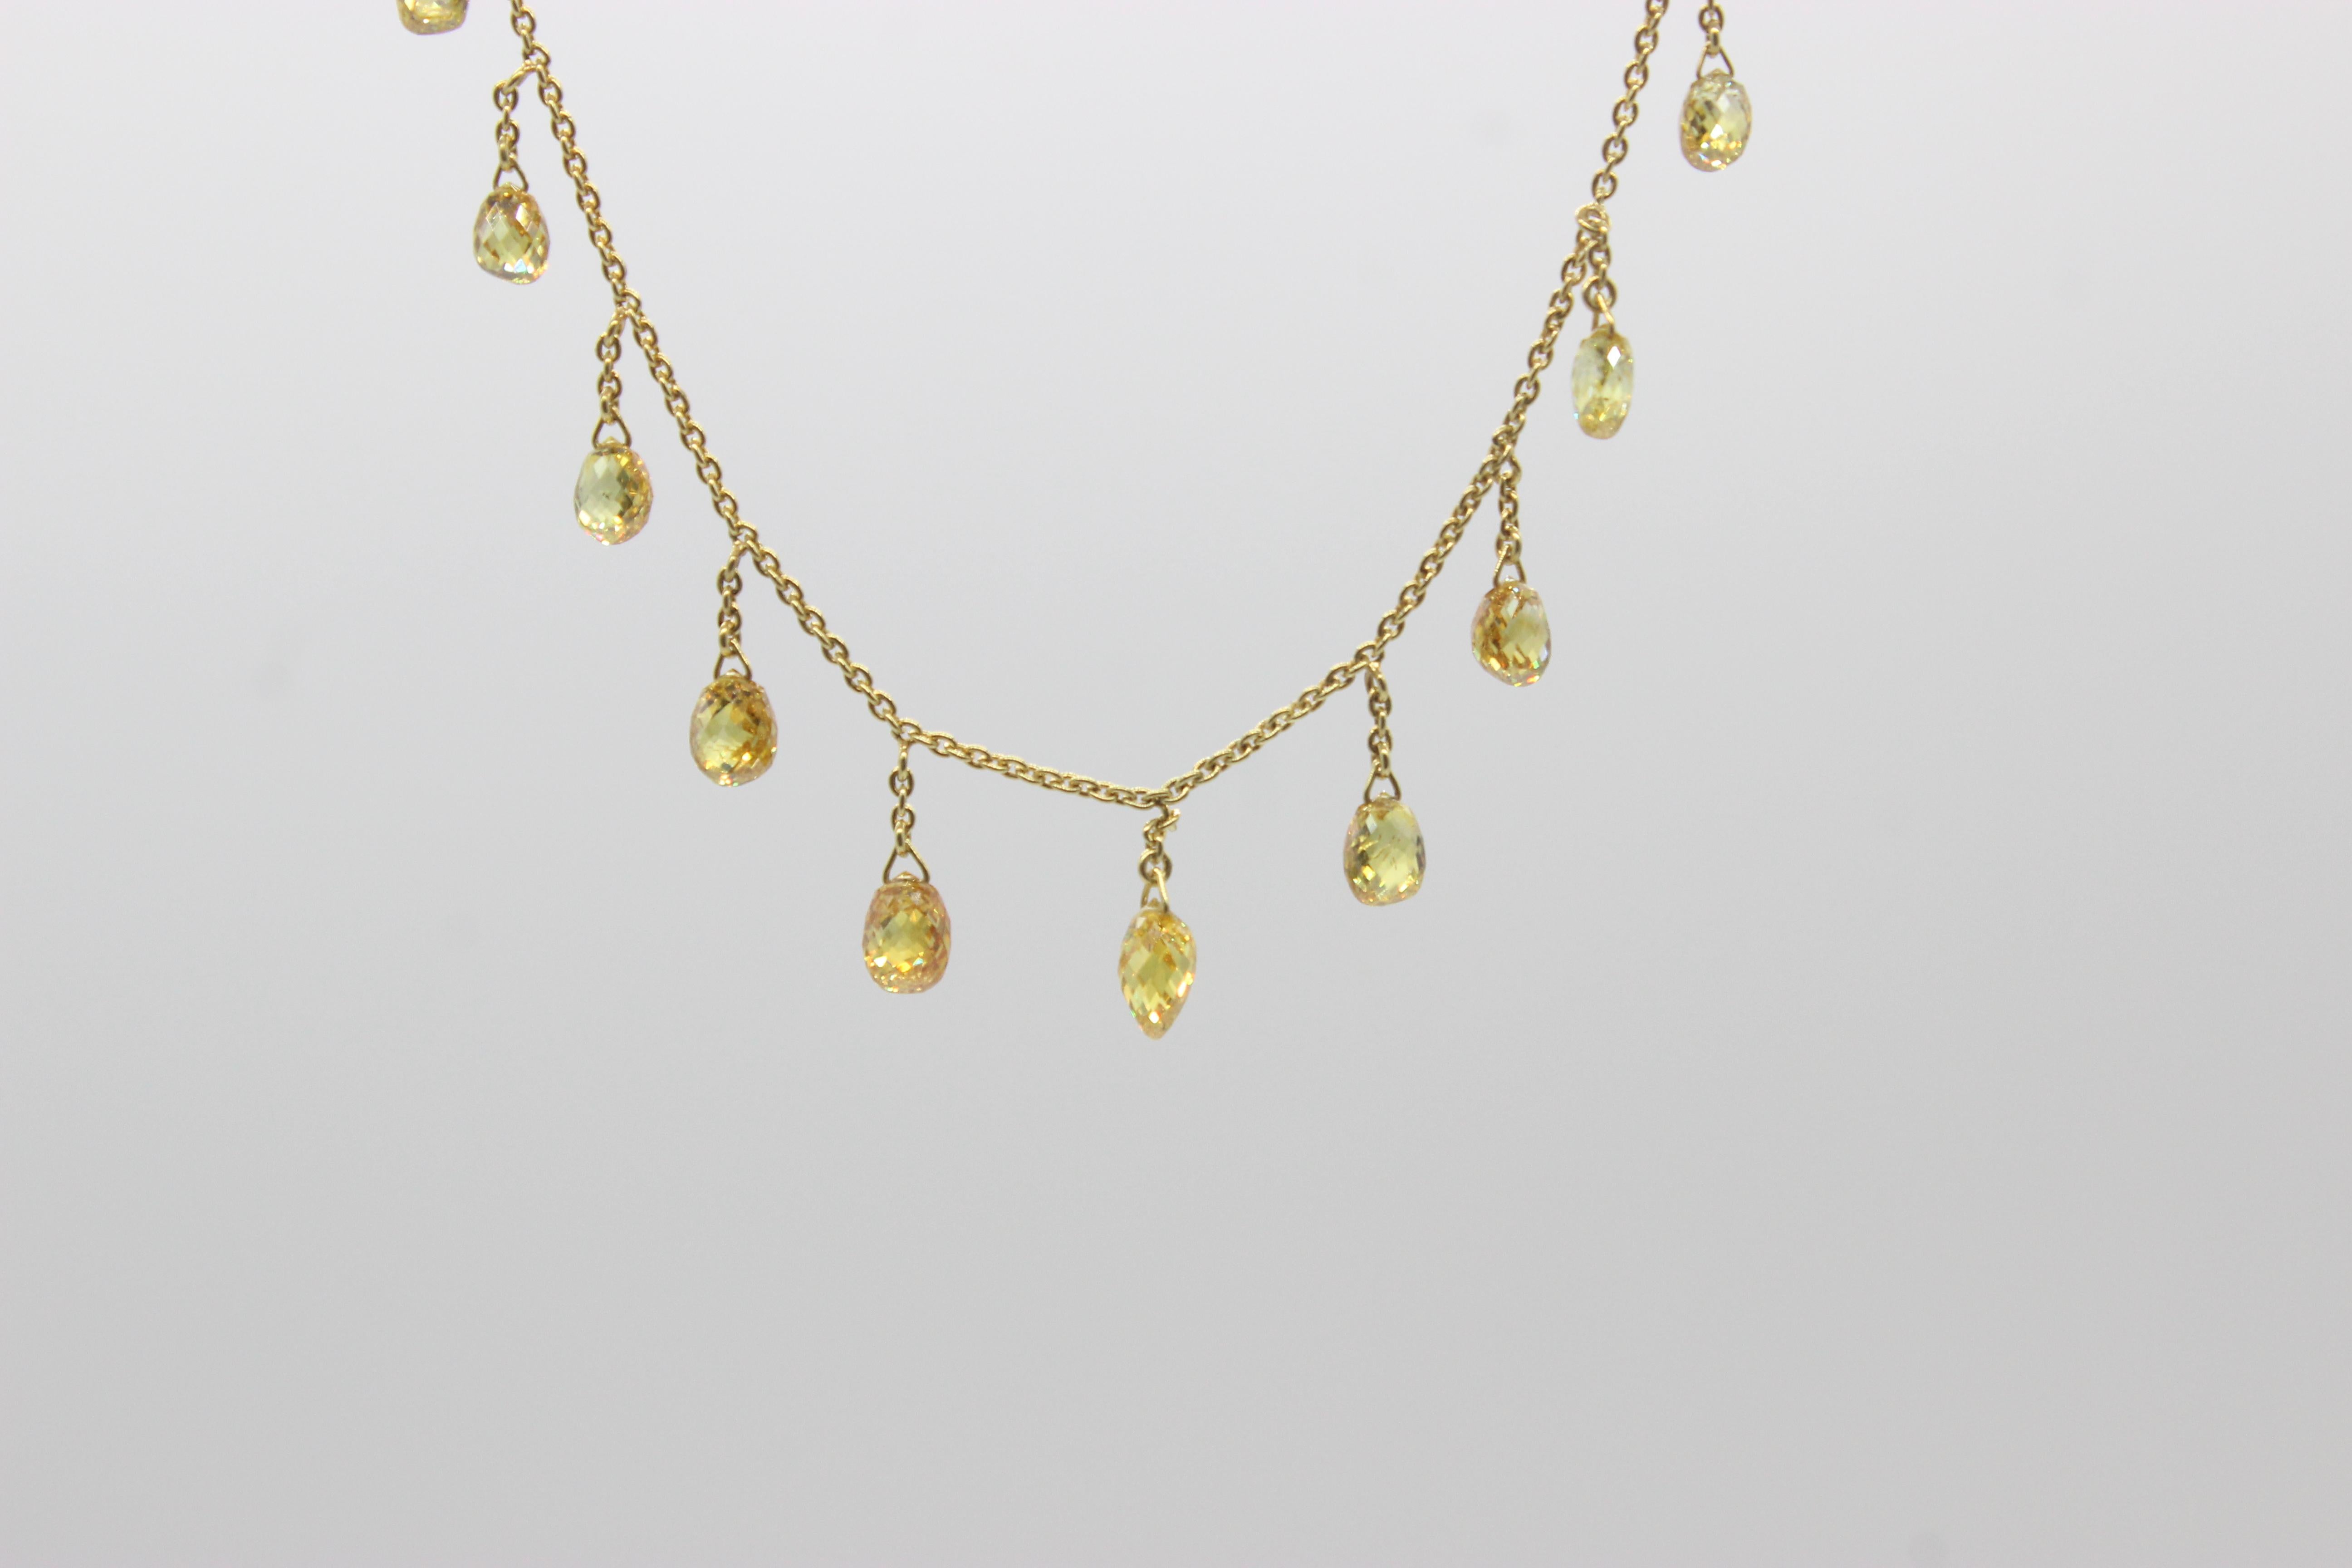 5.30 Carats of Fancy Colour Diamond Briolette set in Necklace having 18k Yellow Gold